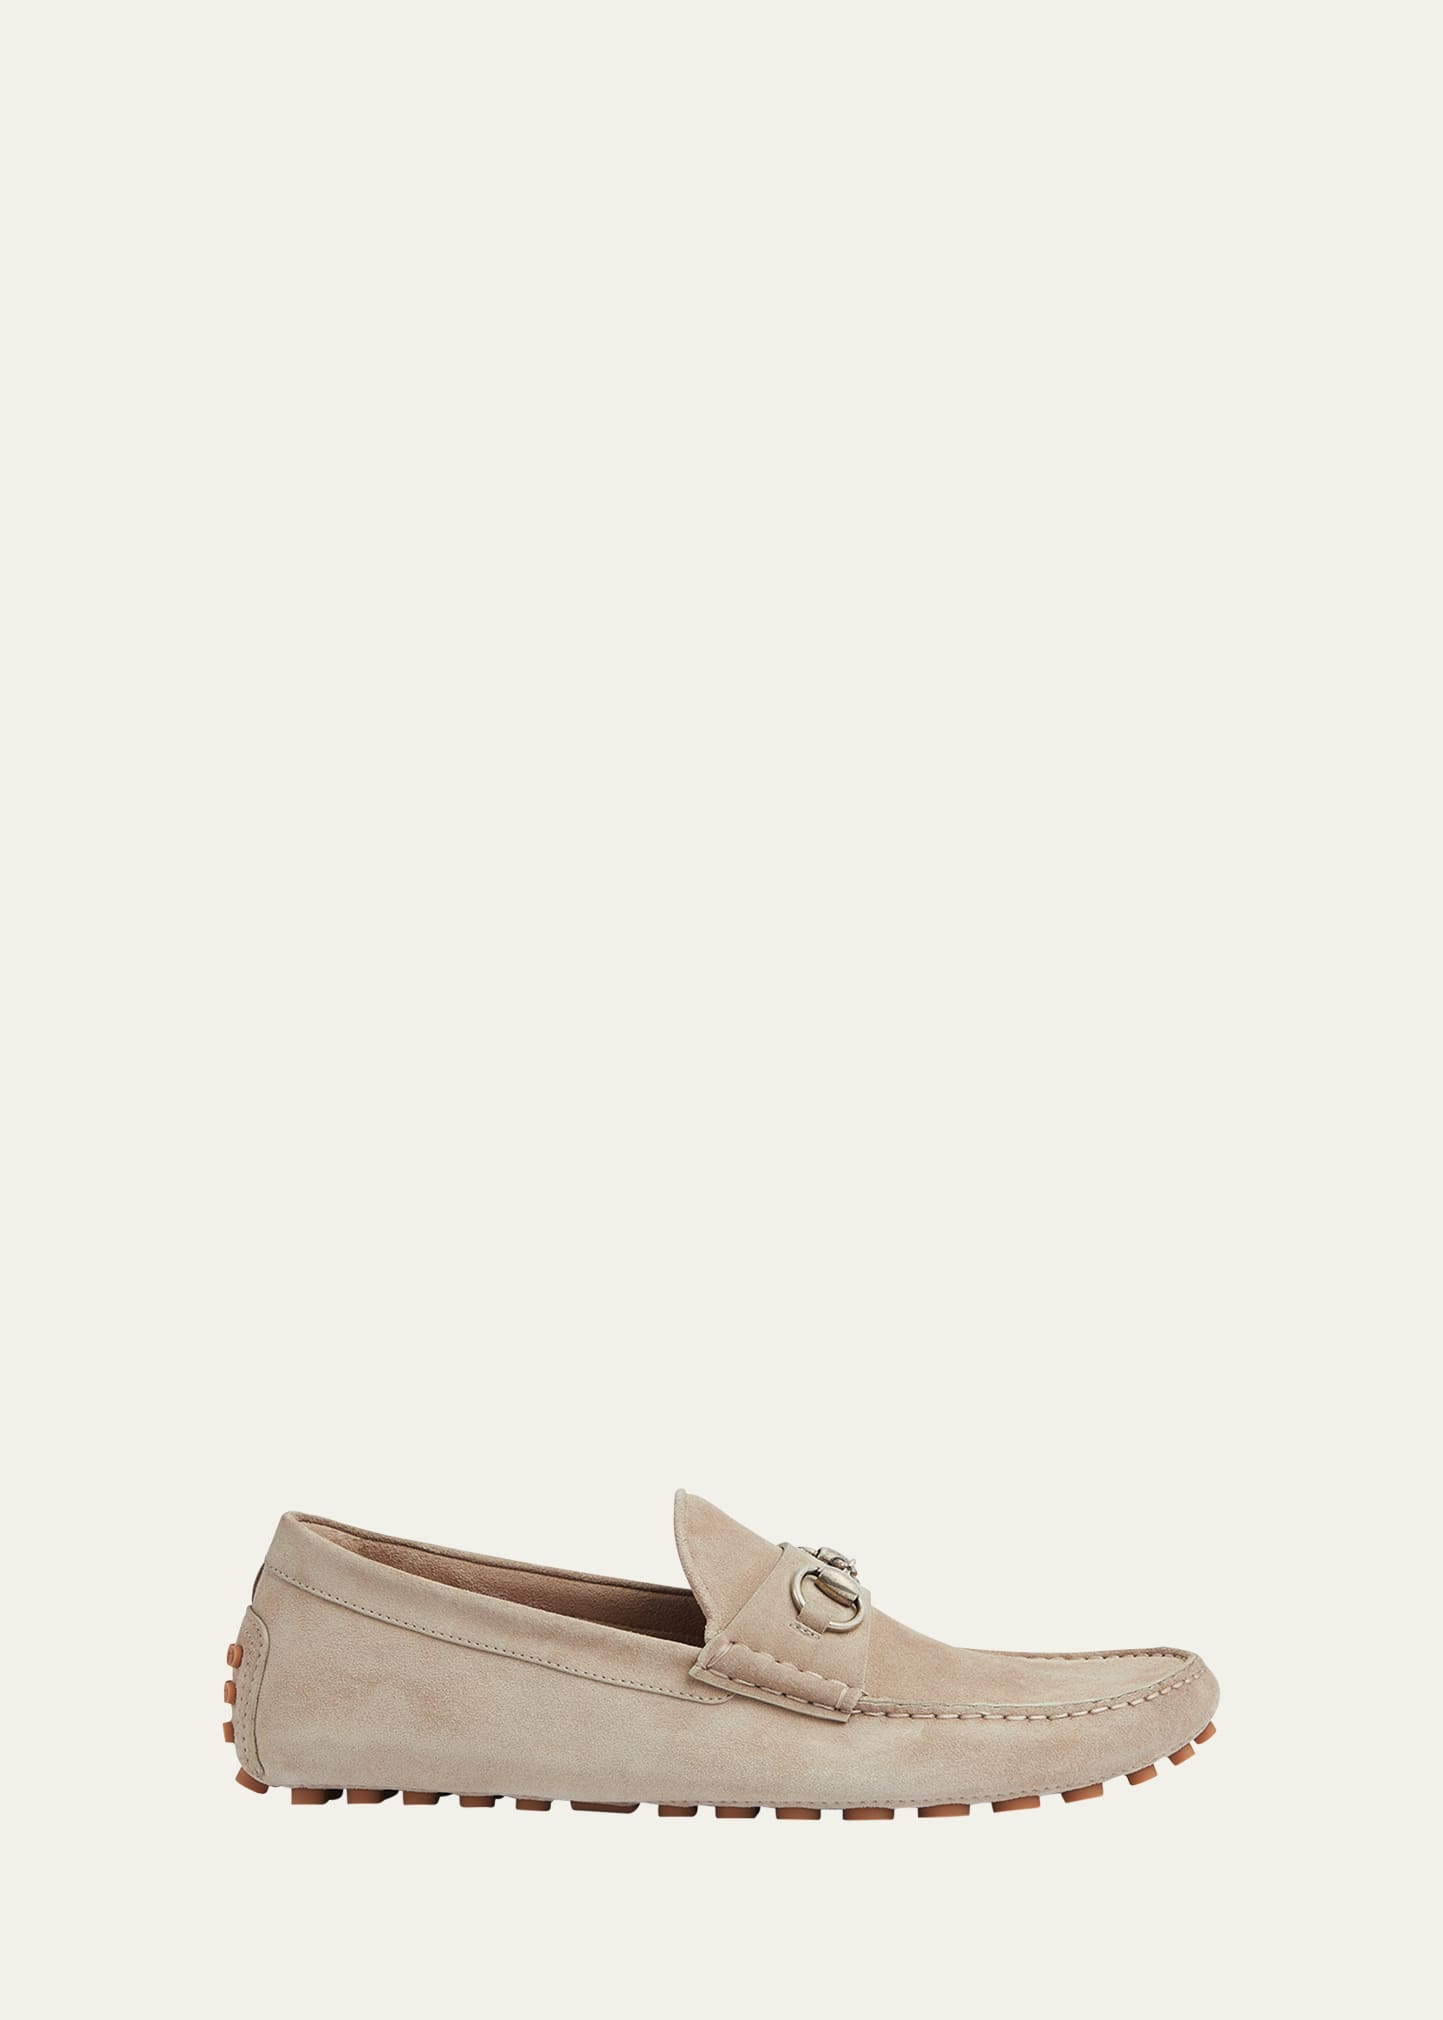 GUCCI MEN'S BYORN SUEDE BIT LOAFERS